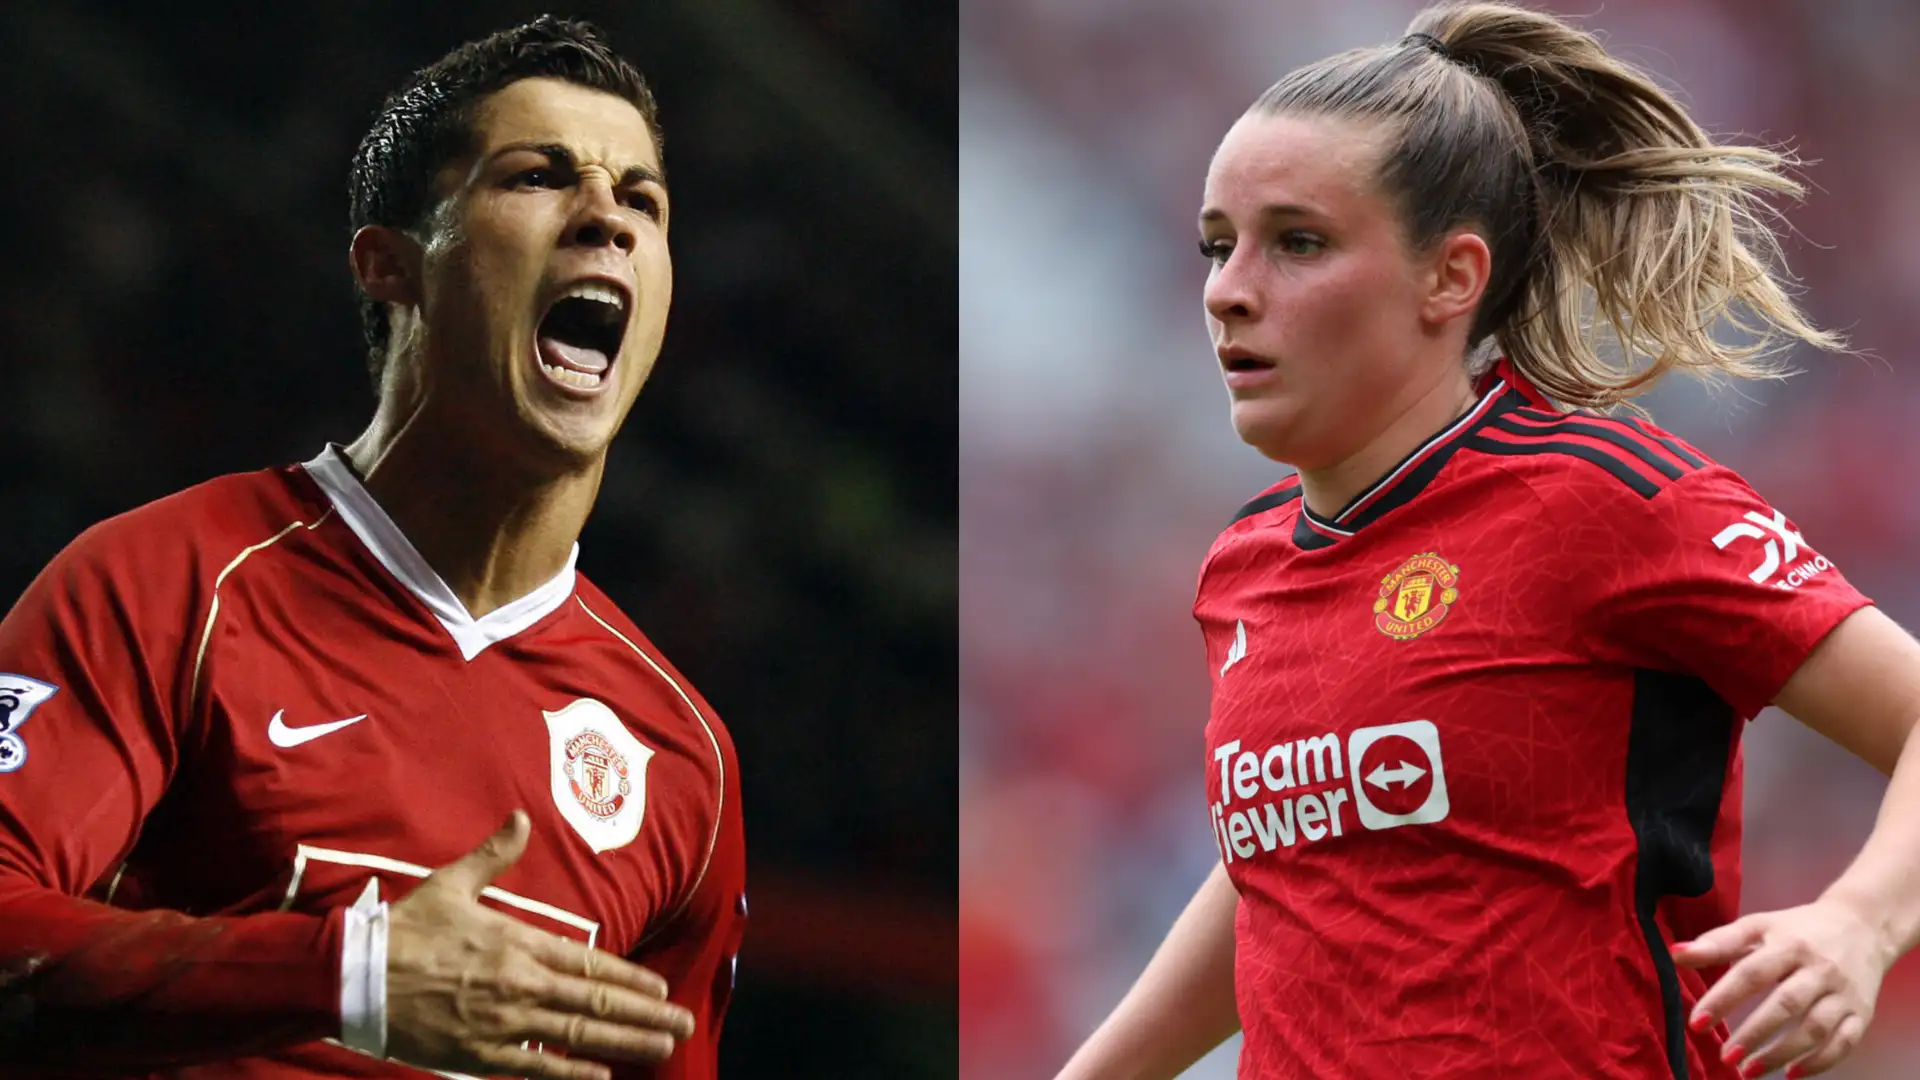 THE BIGGER PICTURE Toone has become the first player to pass 50 appearances for United’s women’s side, as she becomes an inspirational figure in her own right, but the Euro 2022 winner concedes that she was very much a Ronaldo fan girl in her younger years. WHAT TOONE SAID The 24-year-old playmaker has told Sky Sports of idolising CR7: “I always say it. He's probably had such an impact on my career, the way that I wanted to be and that was Cristiano Ronaldo. I wore his boots. I wore the No 7 shirt. I was in love with him at Manchester United and the skills that he did and the confidence he played with.” DID YOU KNOW? Despite being an international performer herself, Toone is yet to cross paths with Ronaldo. She added: “I didn't actually get to meet him. I did see him one time, the girls were all looking through the window going: 'That's Ronaldo!' He did send me a video once and I've got that saved in the favourites!” WHAT NEXT? Toone wears the No.7 shirt for United, and did that iconic jersey justice in the 2024 Women’s FA Cup final as she crashed home a spectacular strike against Tottenham at Wembley and paved the way for the Red Devils to claim a first major honour at the very highest level.